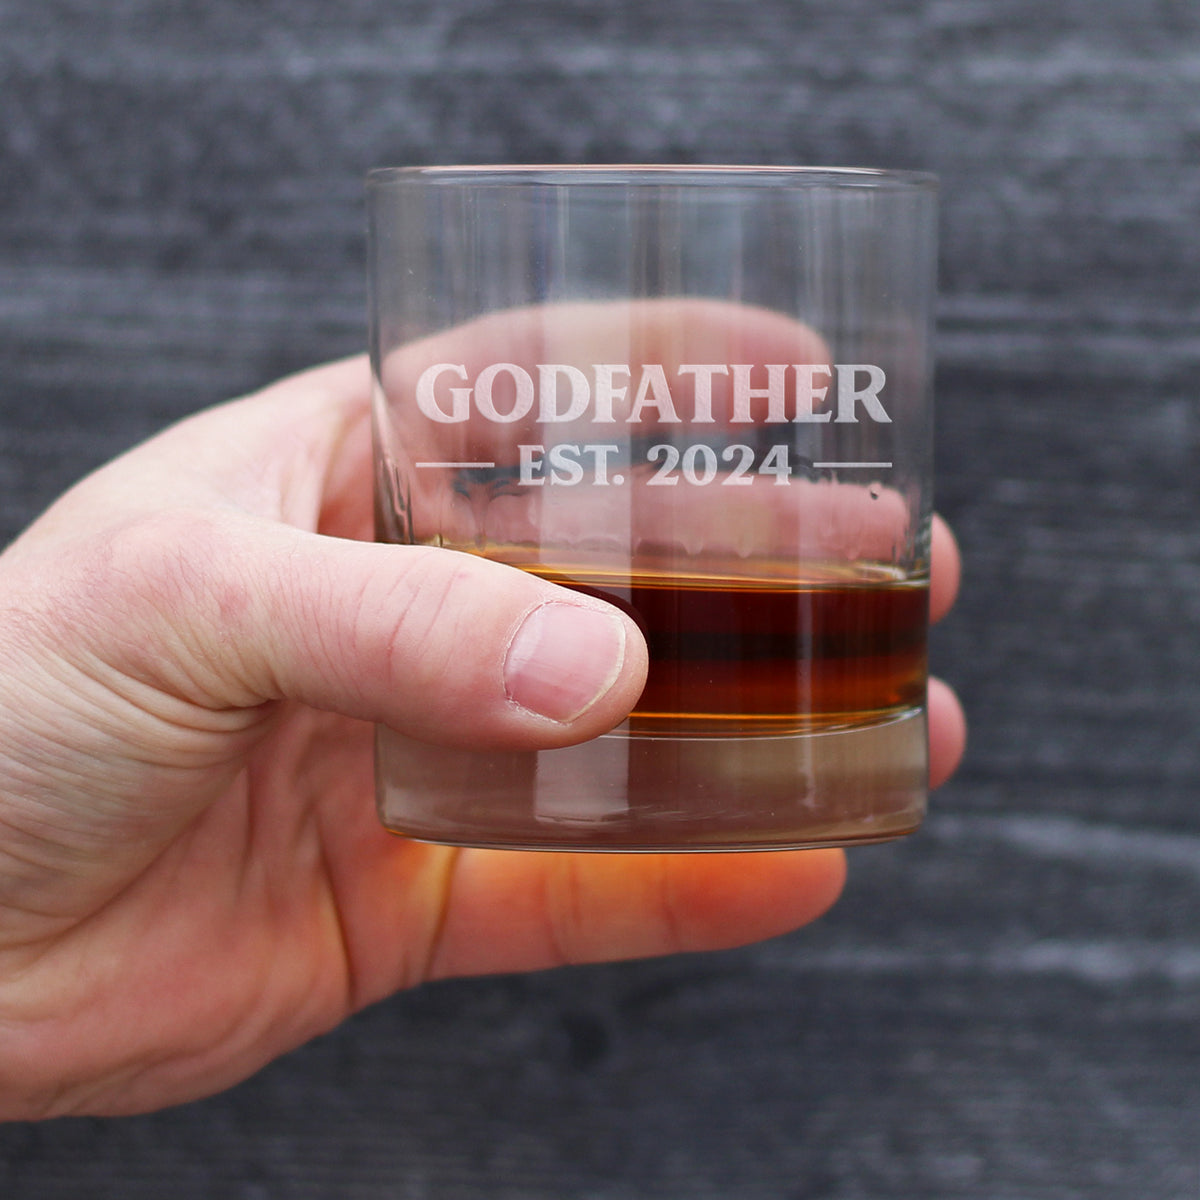 Godfather Est 2024 - New Godfather Whiskey Rocks Glass Proposal Gift for First Time Godparents - Bold 10.25 Oz Glasses